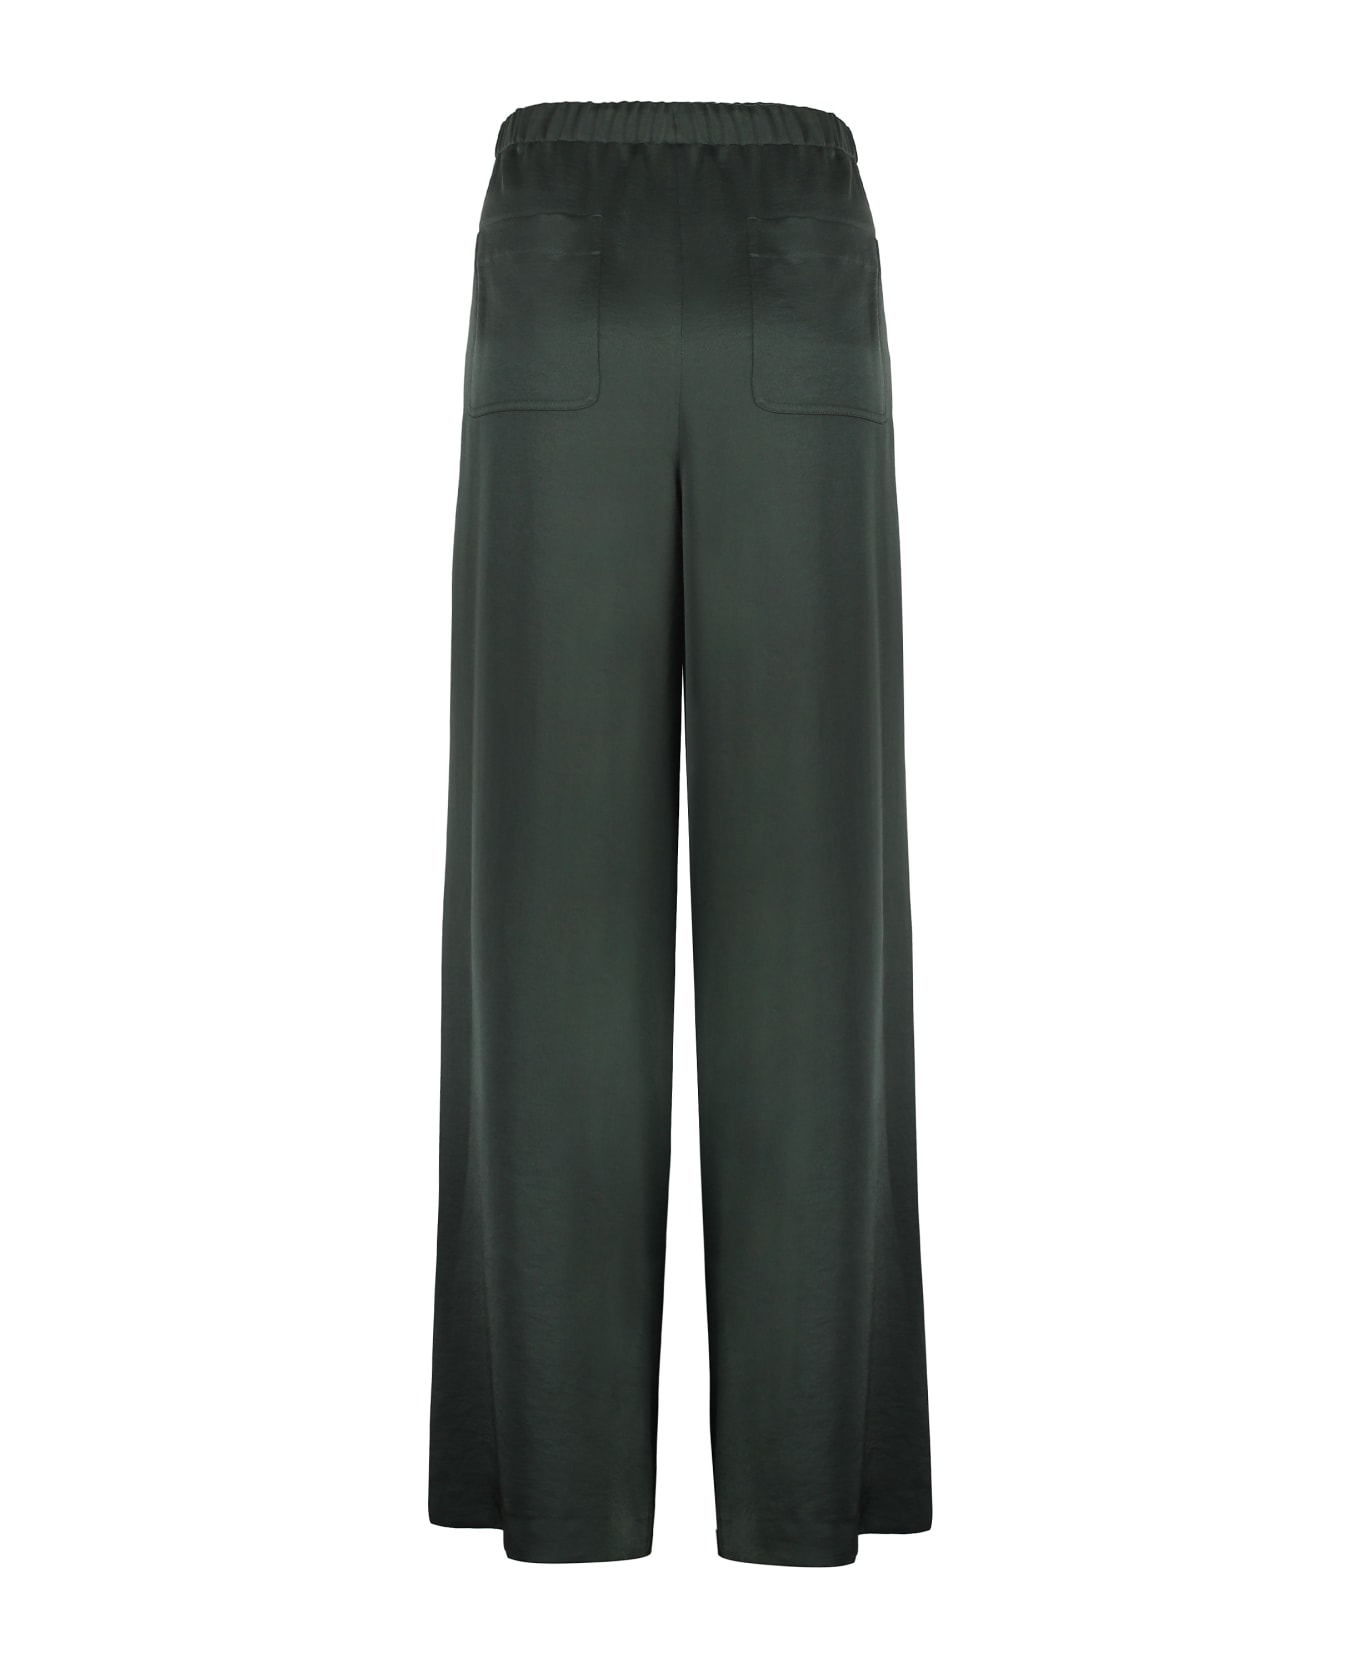 Vince Satin Trousers - green ボトムス